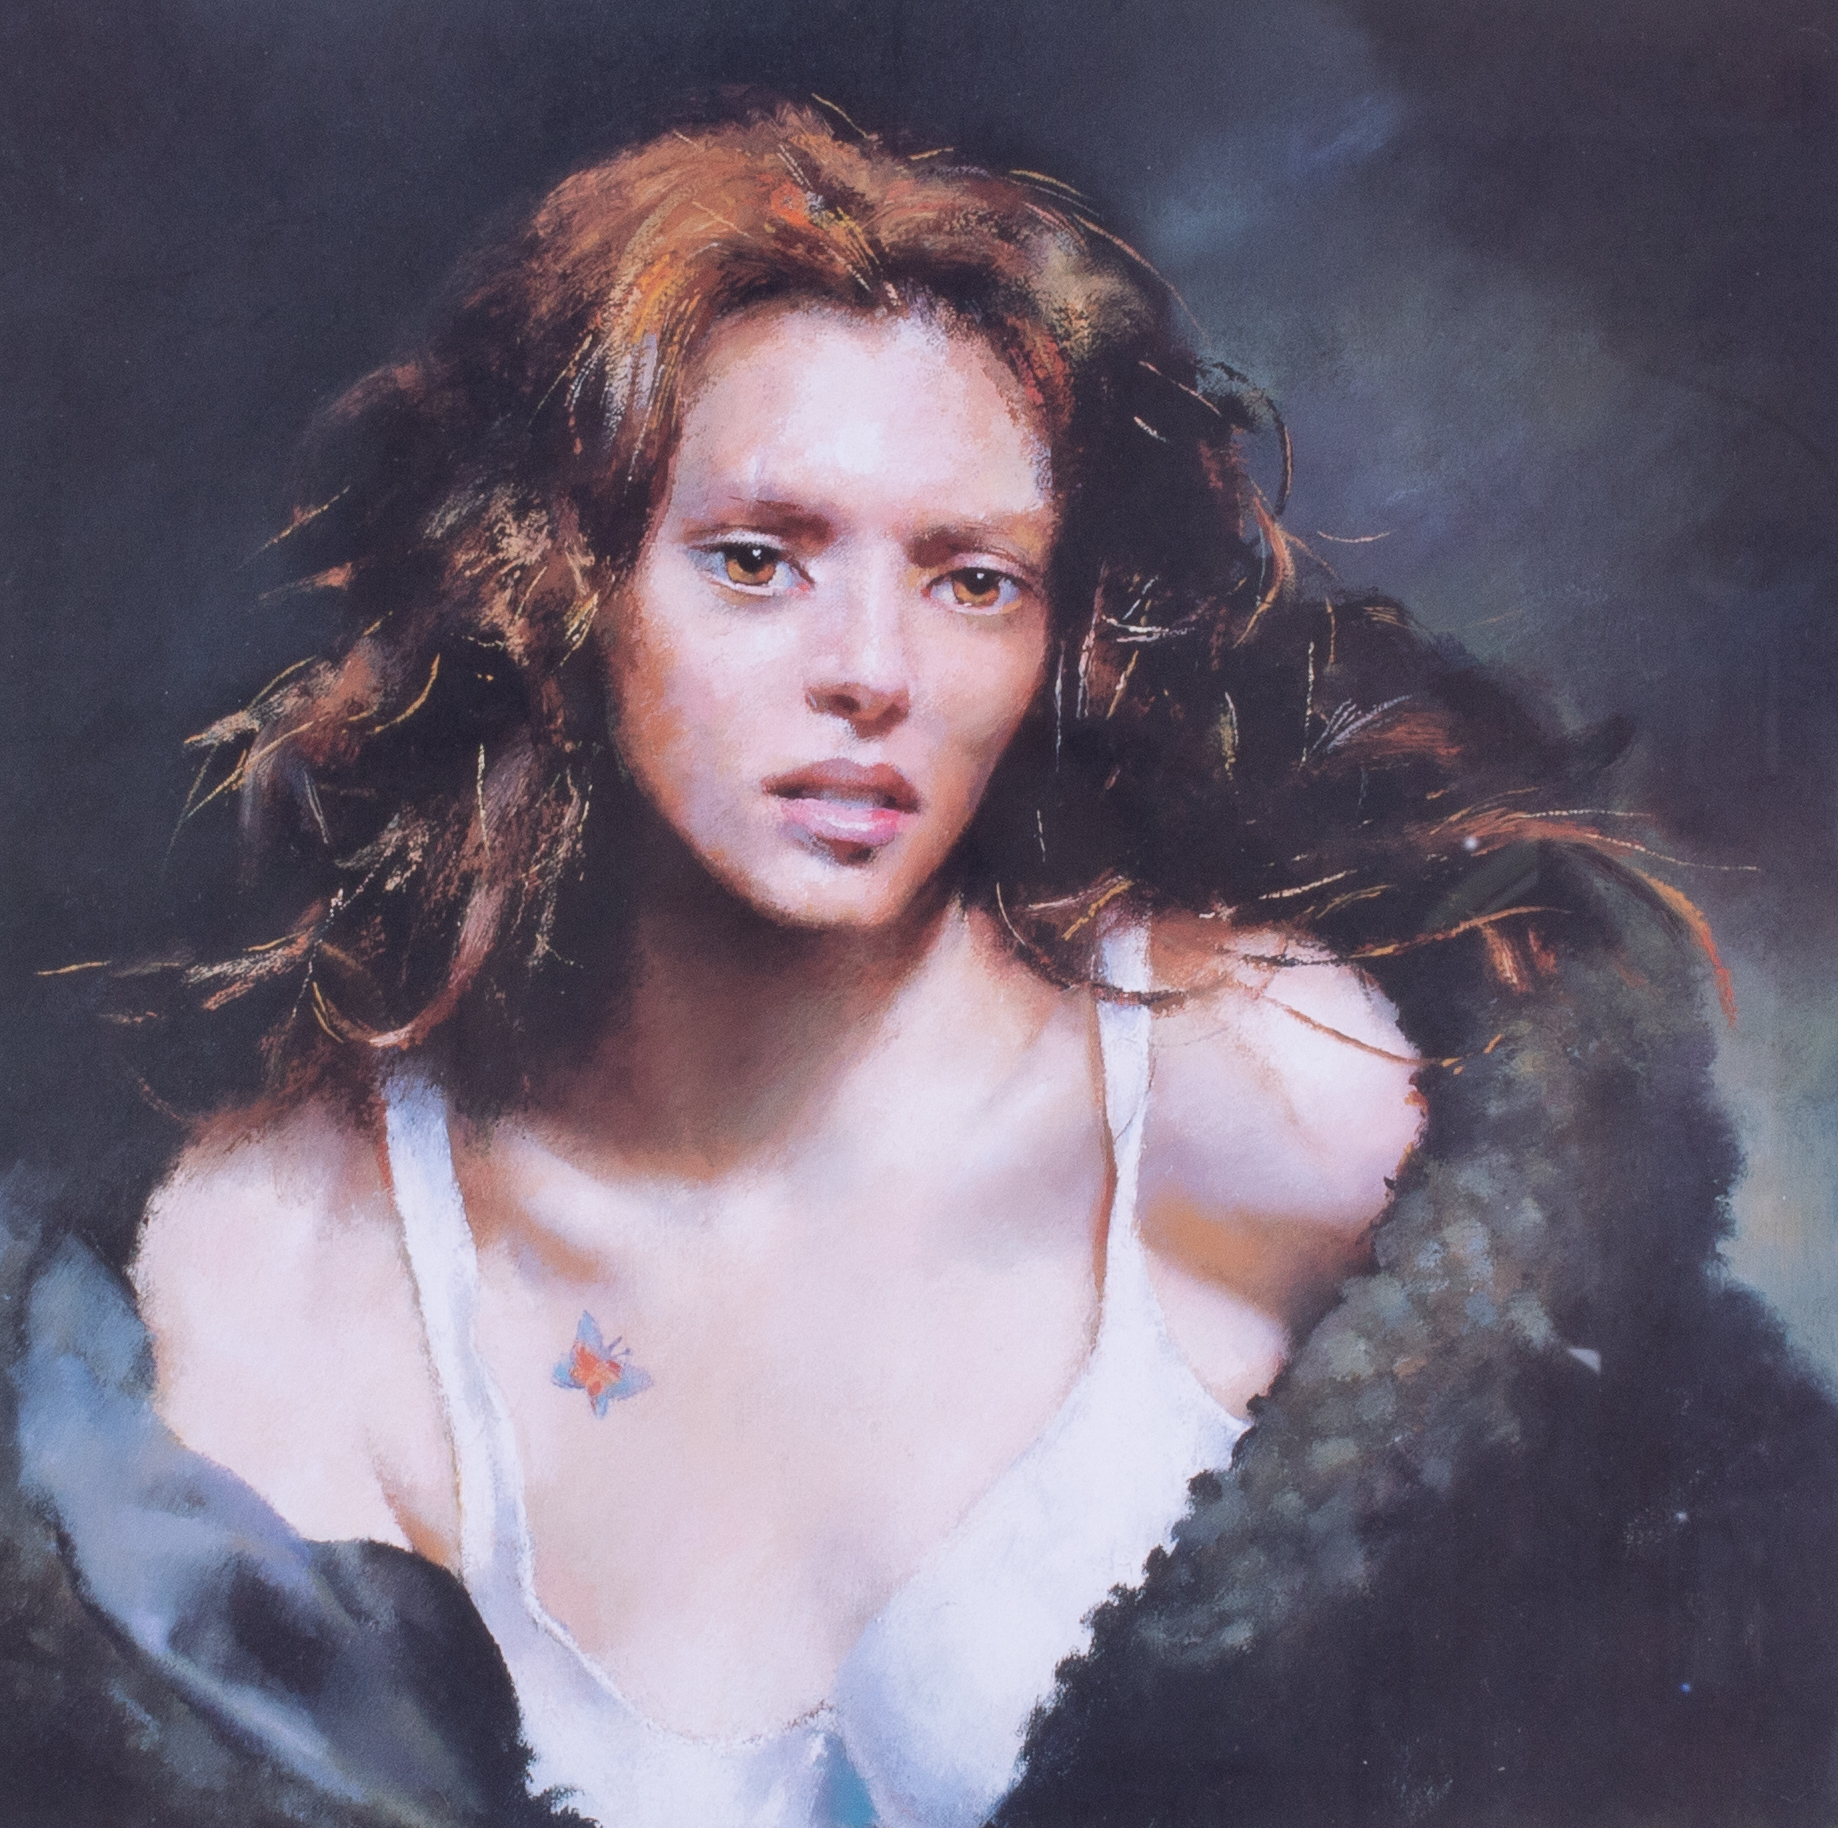 Robert Lenkiewicz (1941-2002) 'Faraday' limited edition print 98/395, with embossed